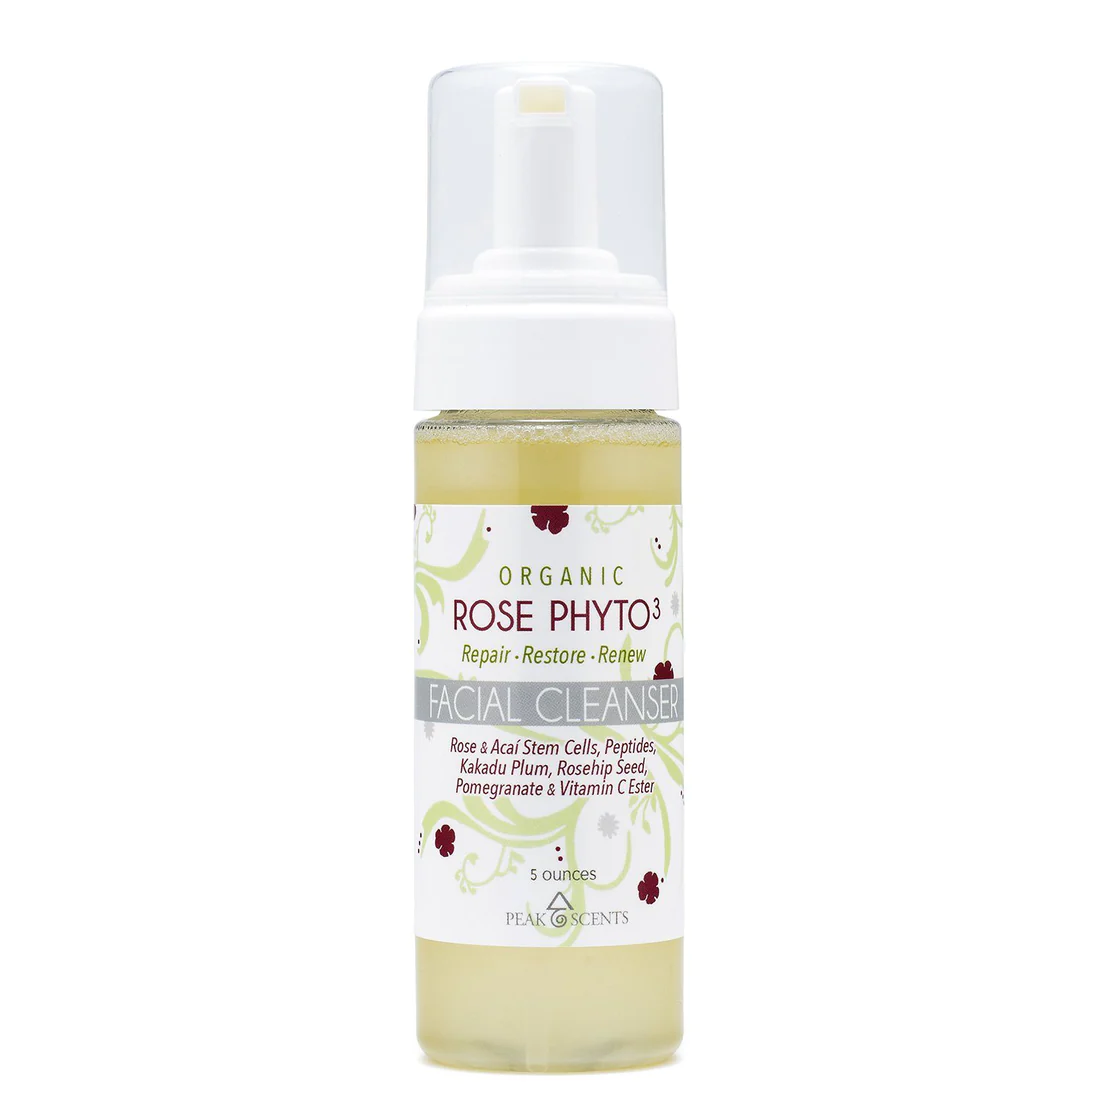 Organic Rose Phyto³ Facial Cleanser - 5 oz.